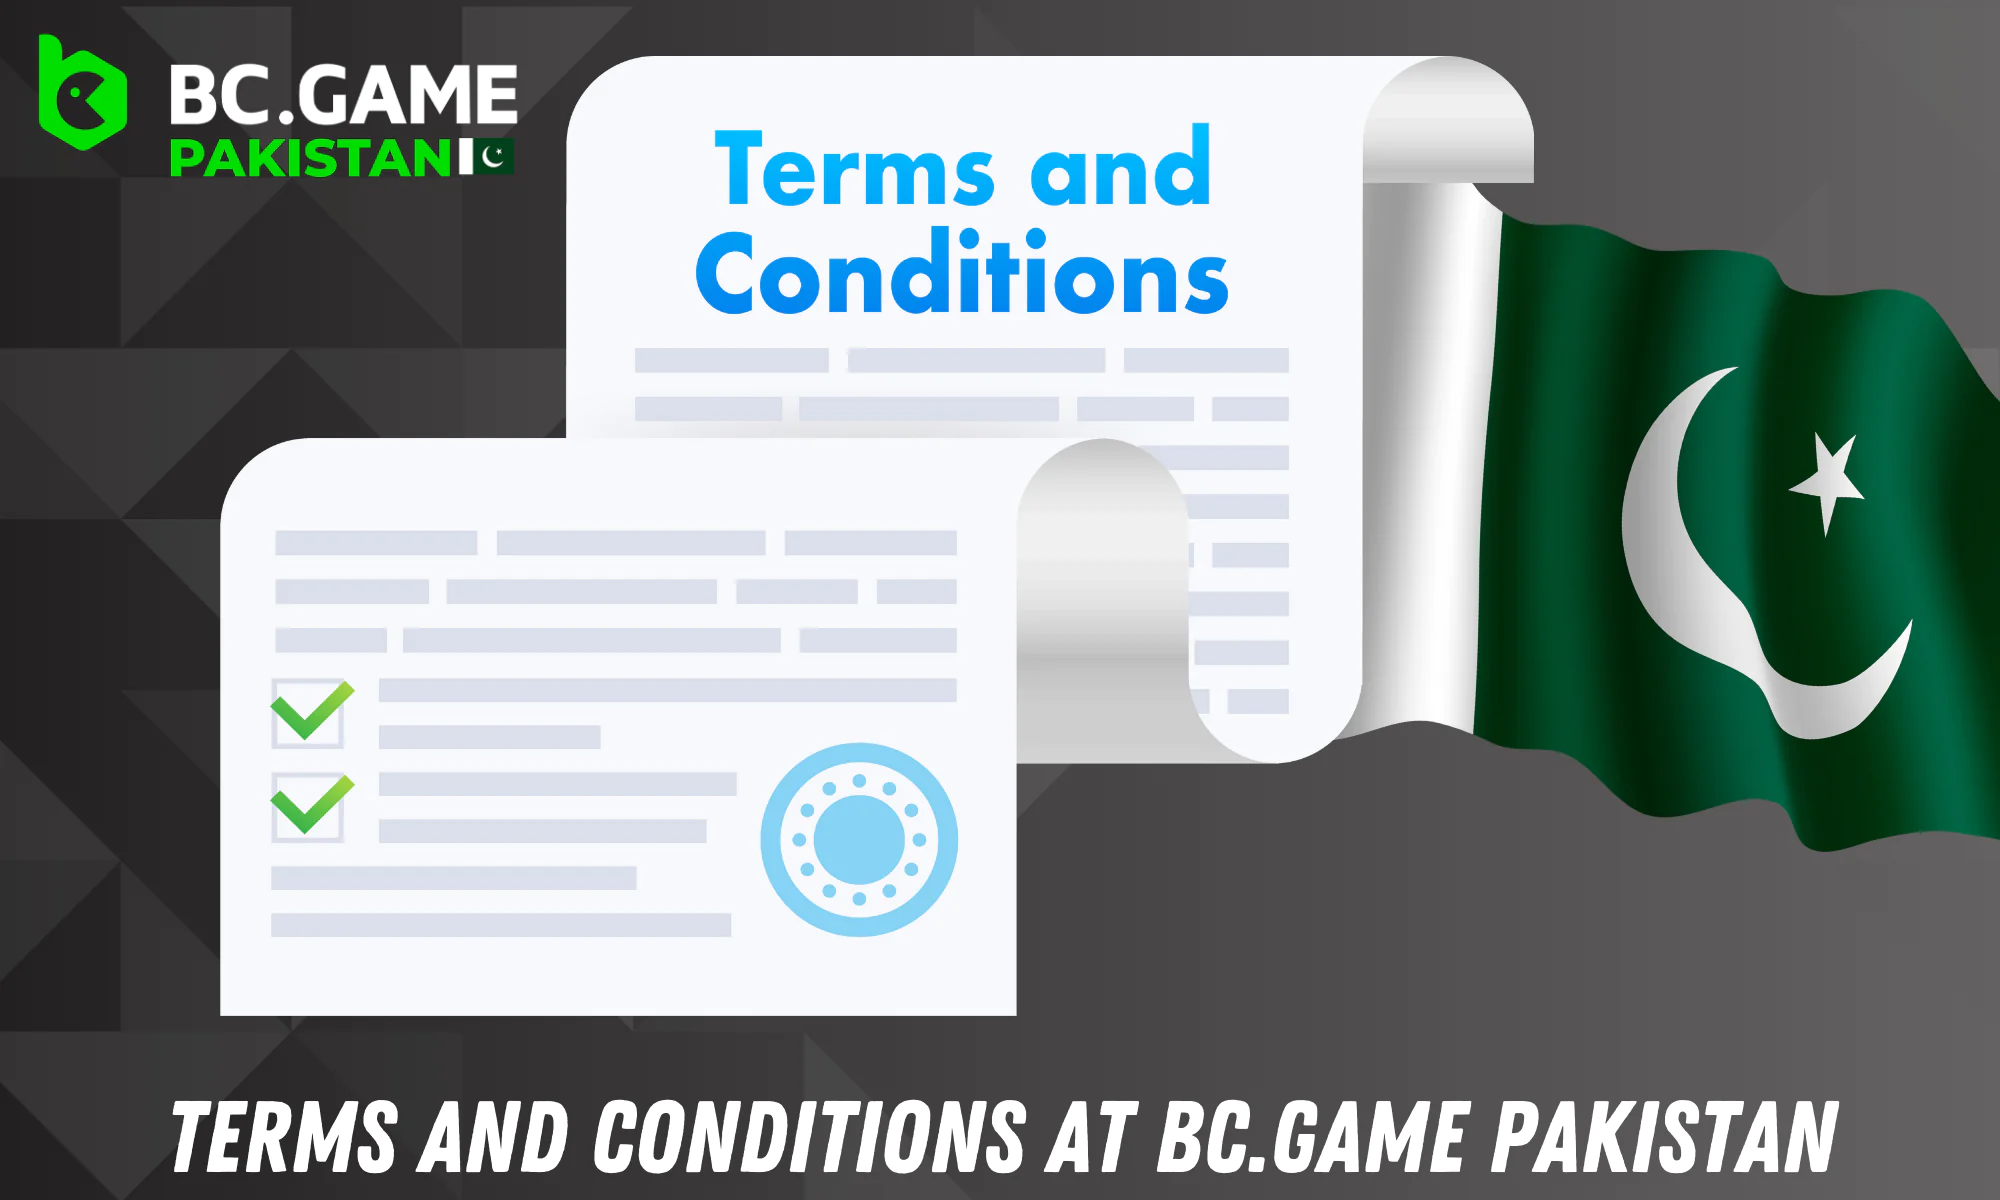 BC.GAME Pakistan has certain terms and conditions that players should familiarize themselves with before starting the game